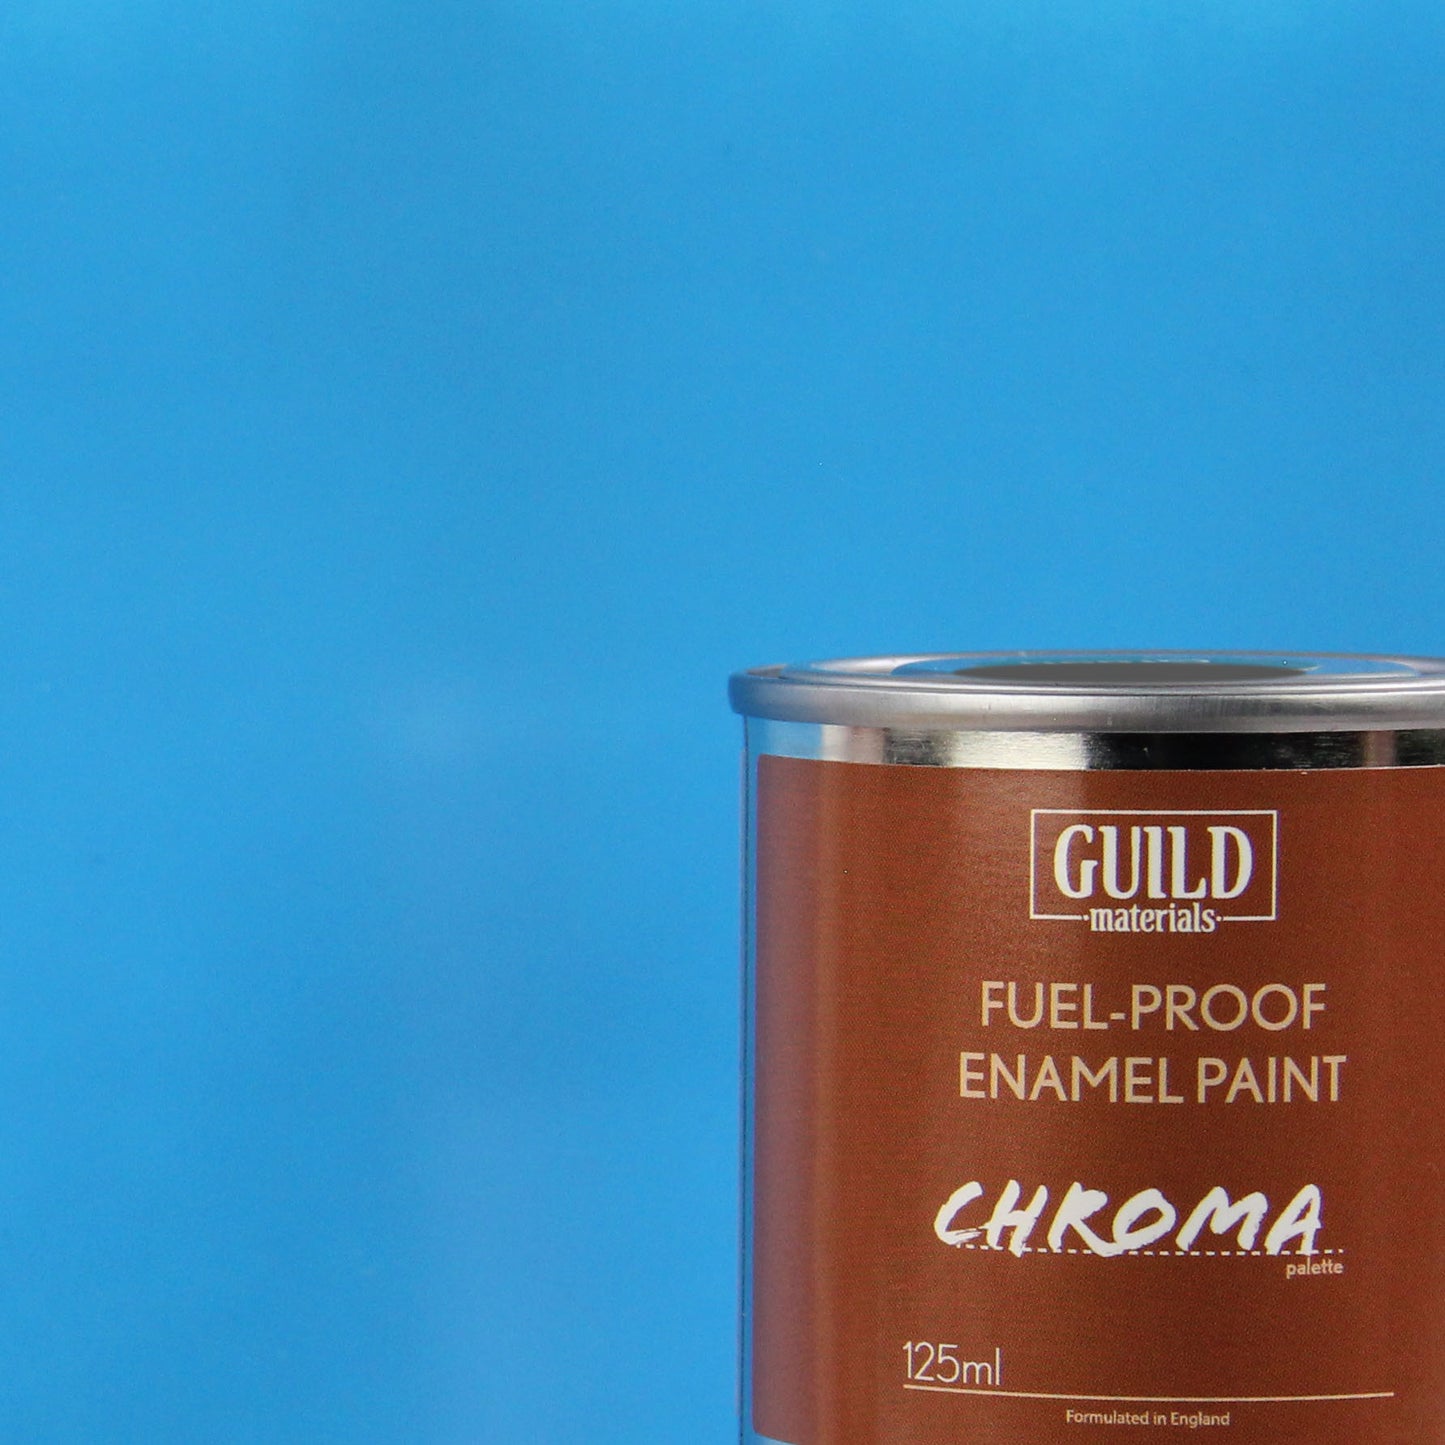 Load image into Gallery viewer, Chroma Enamel Fuelproof Paint Gloss Light Blue (125ml Tin)
